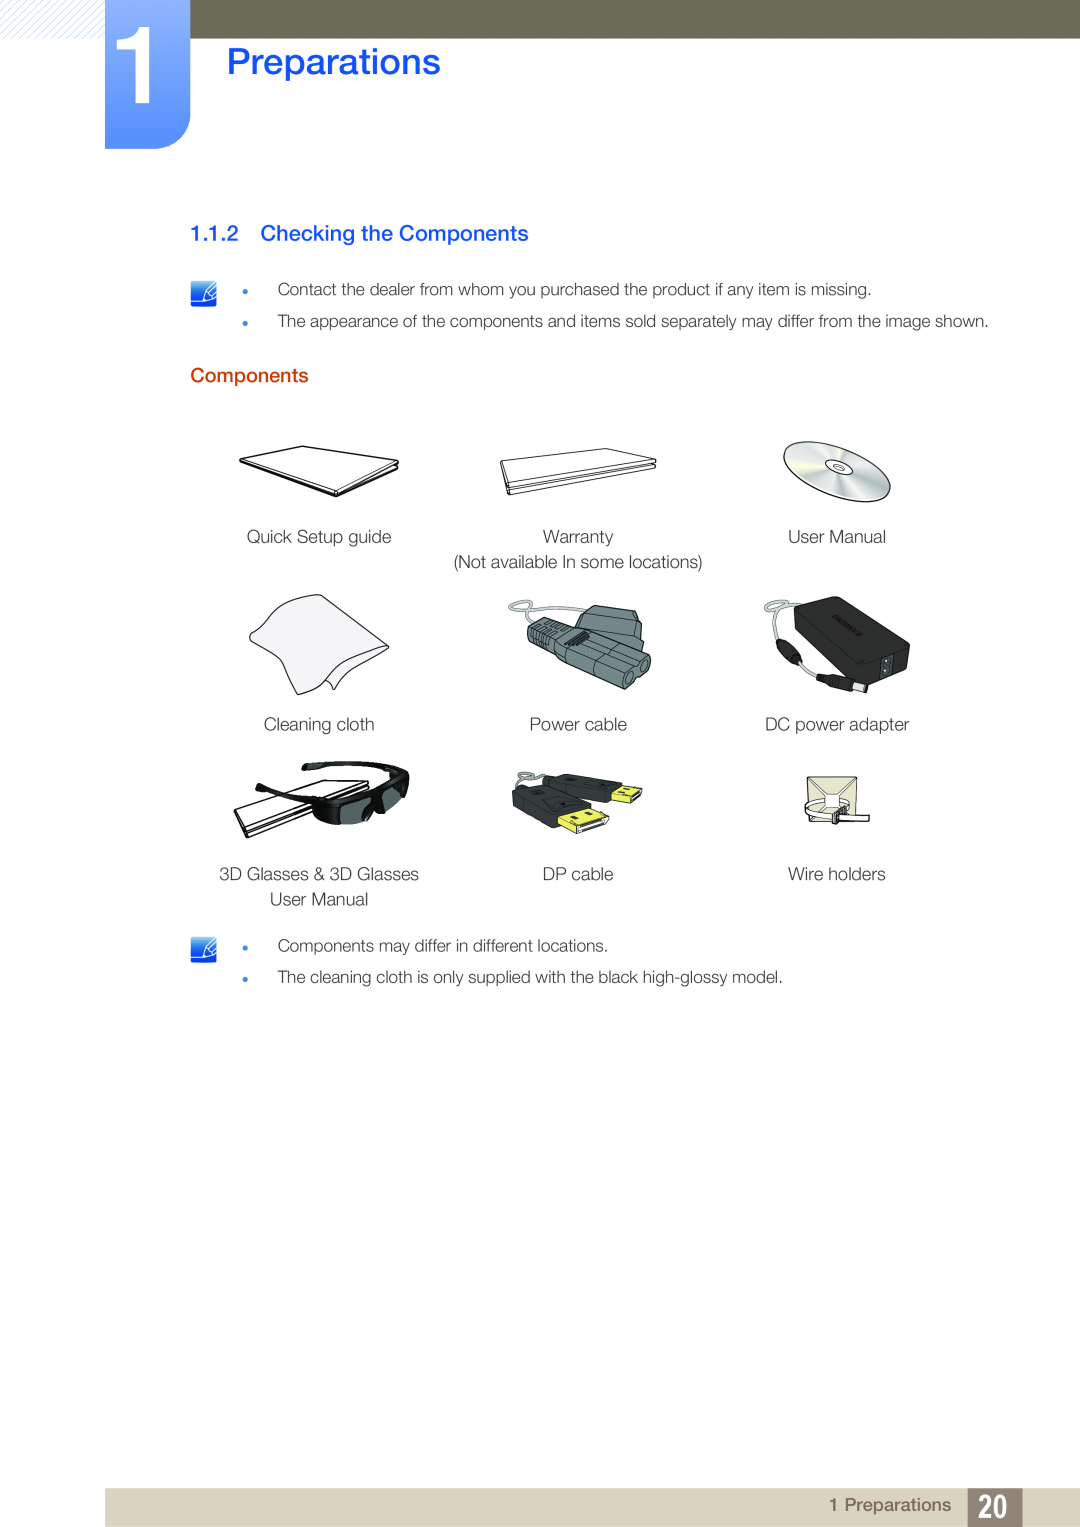 Samsung S27A750D, S23A750D user manual Checking the Components, Preparations 